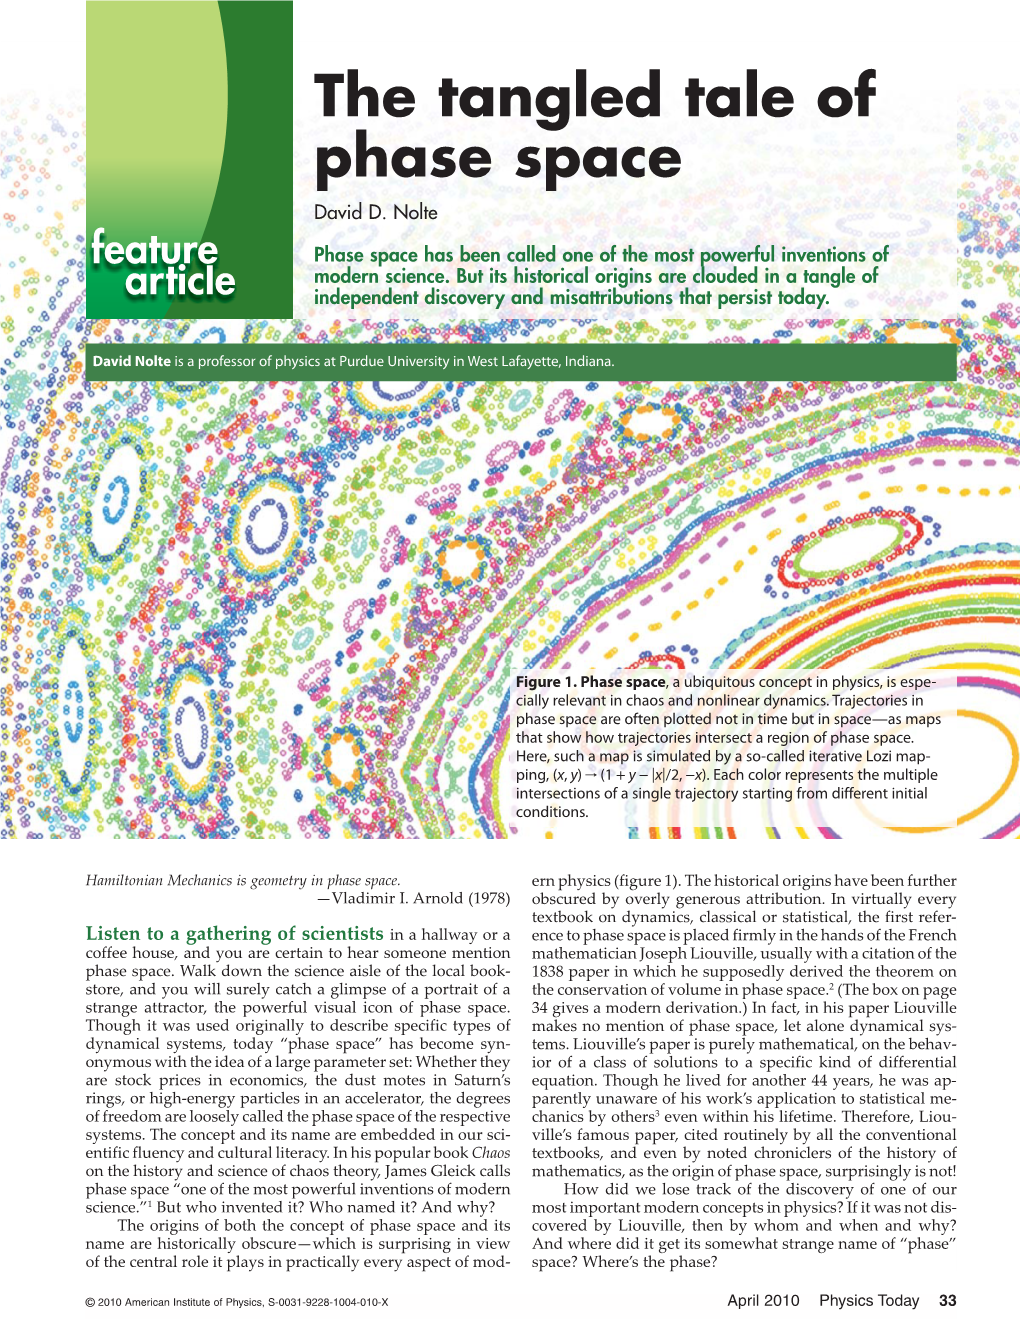 The Tangled Tale of Phase Space David D